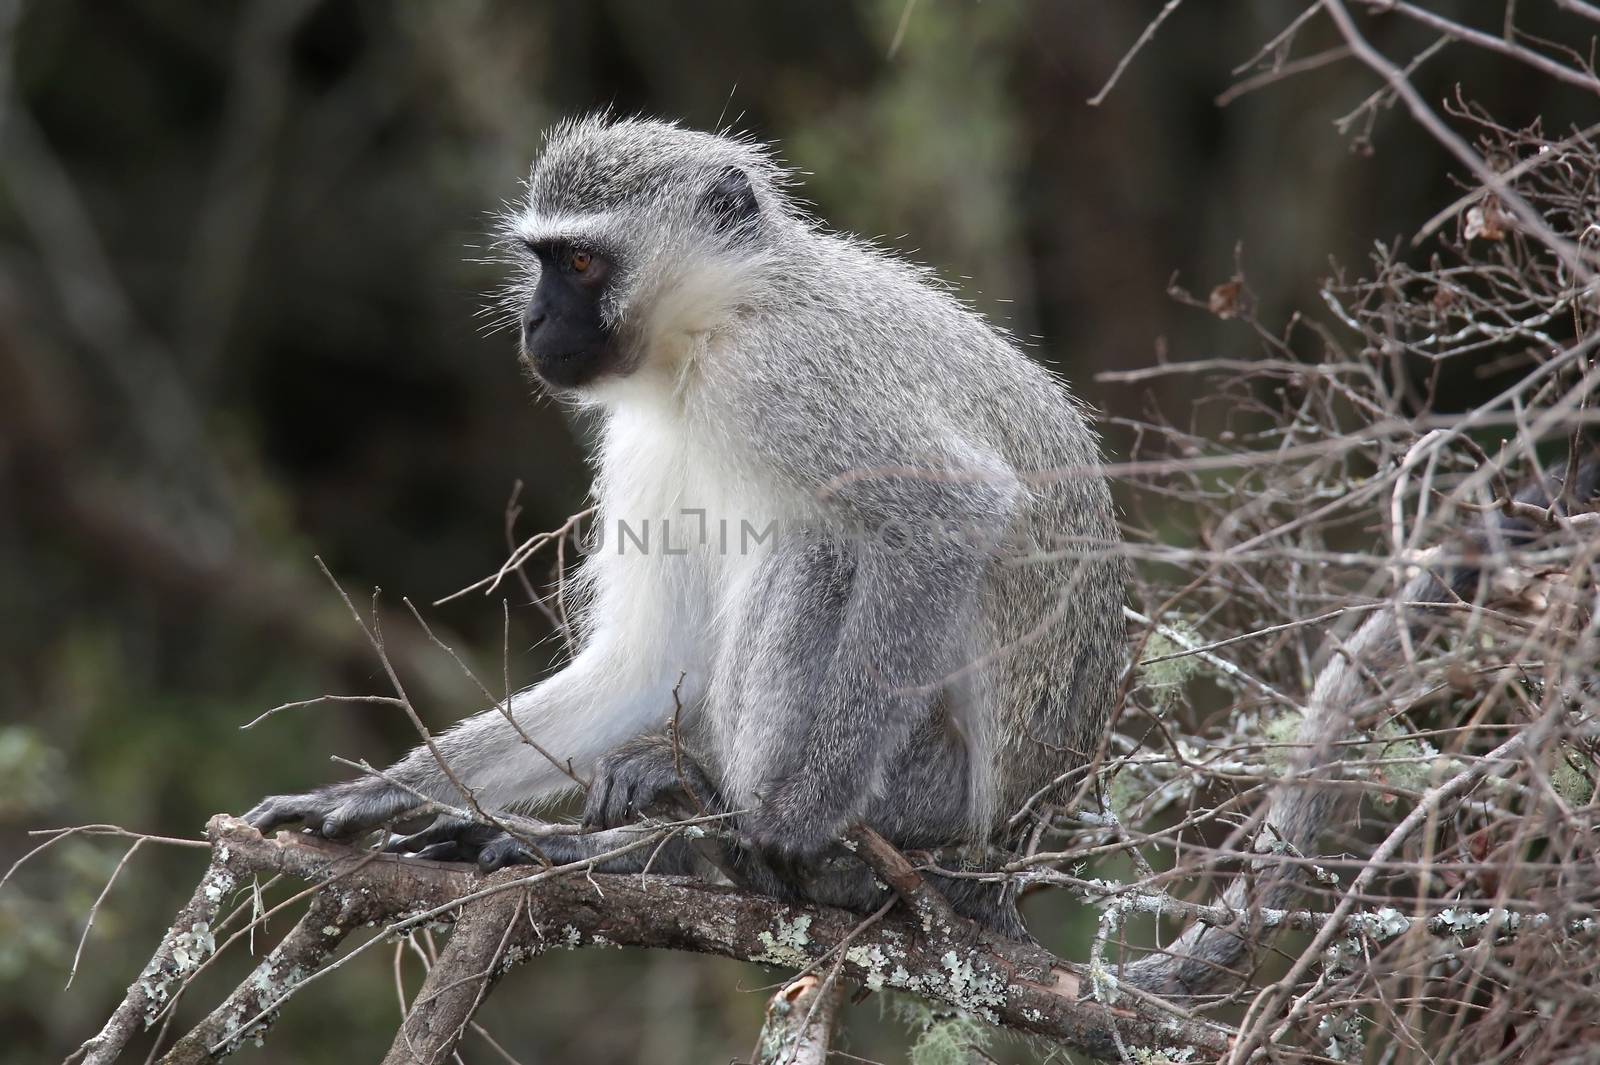 Cute vervet monkey with a black face sitting in a tree